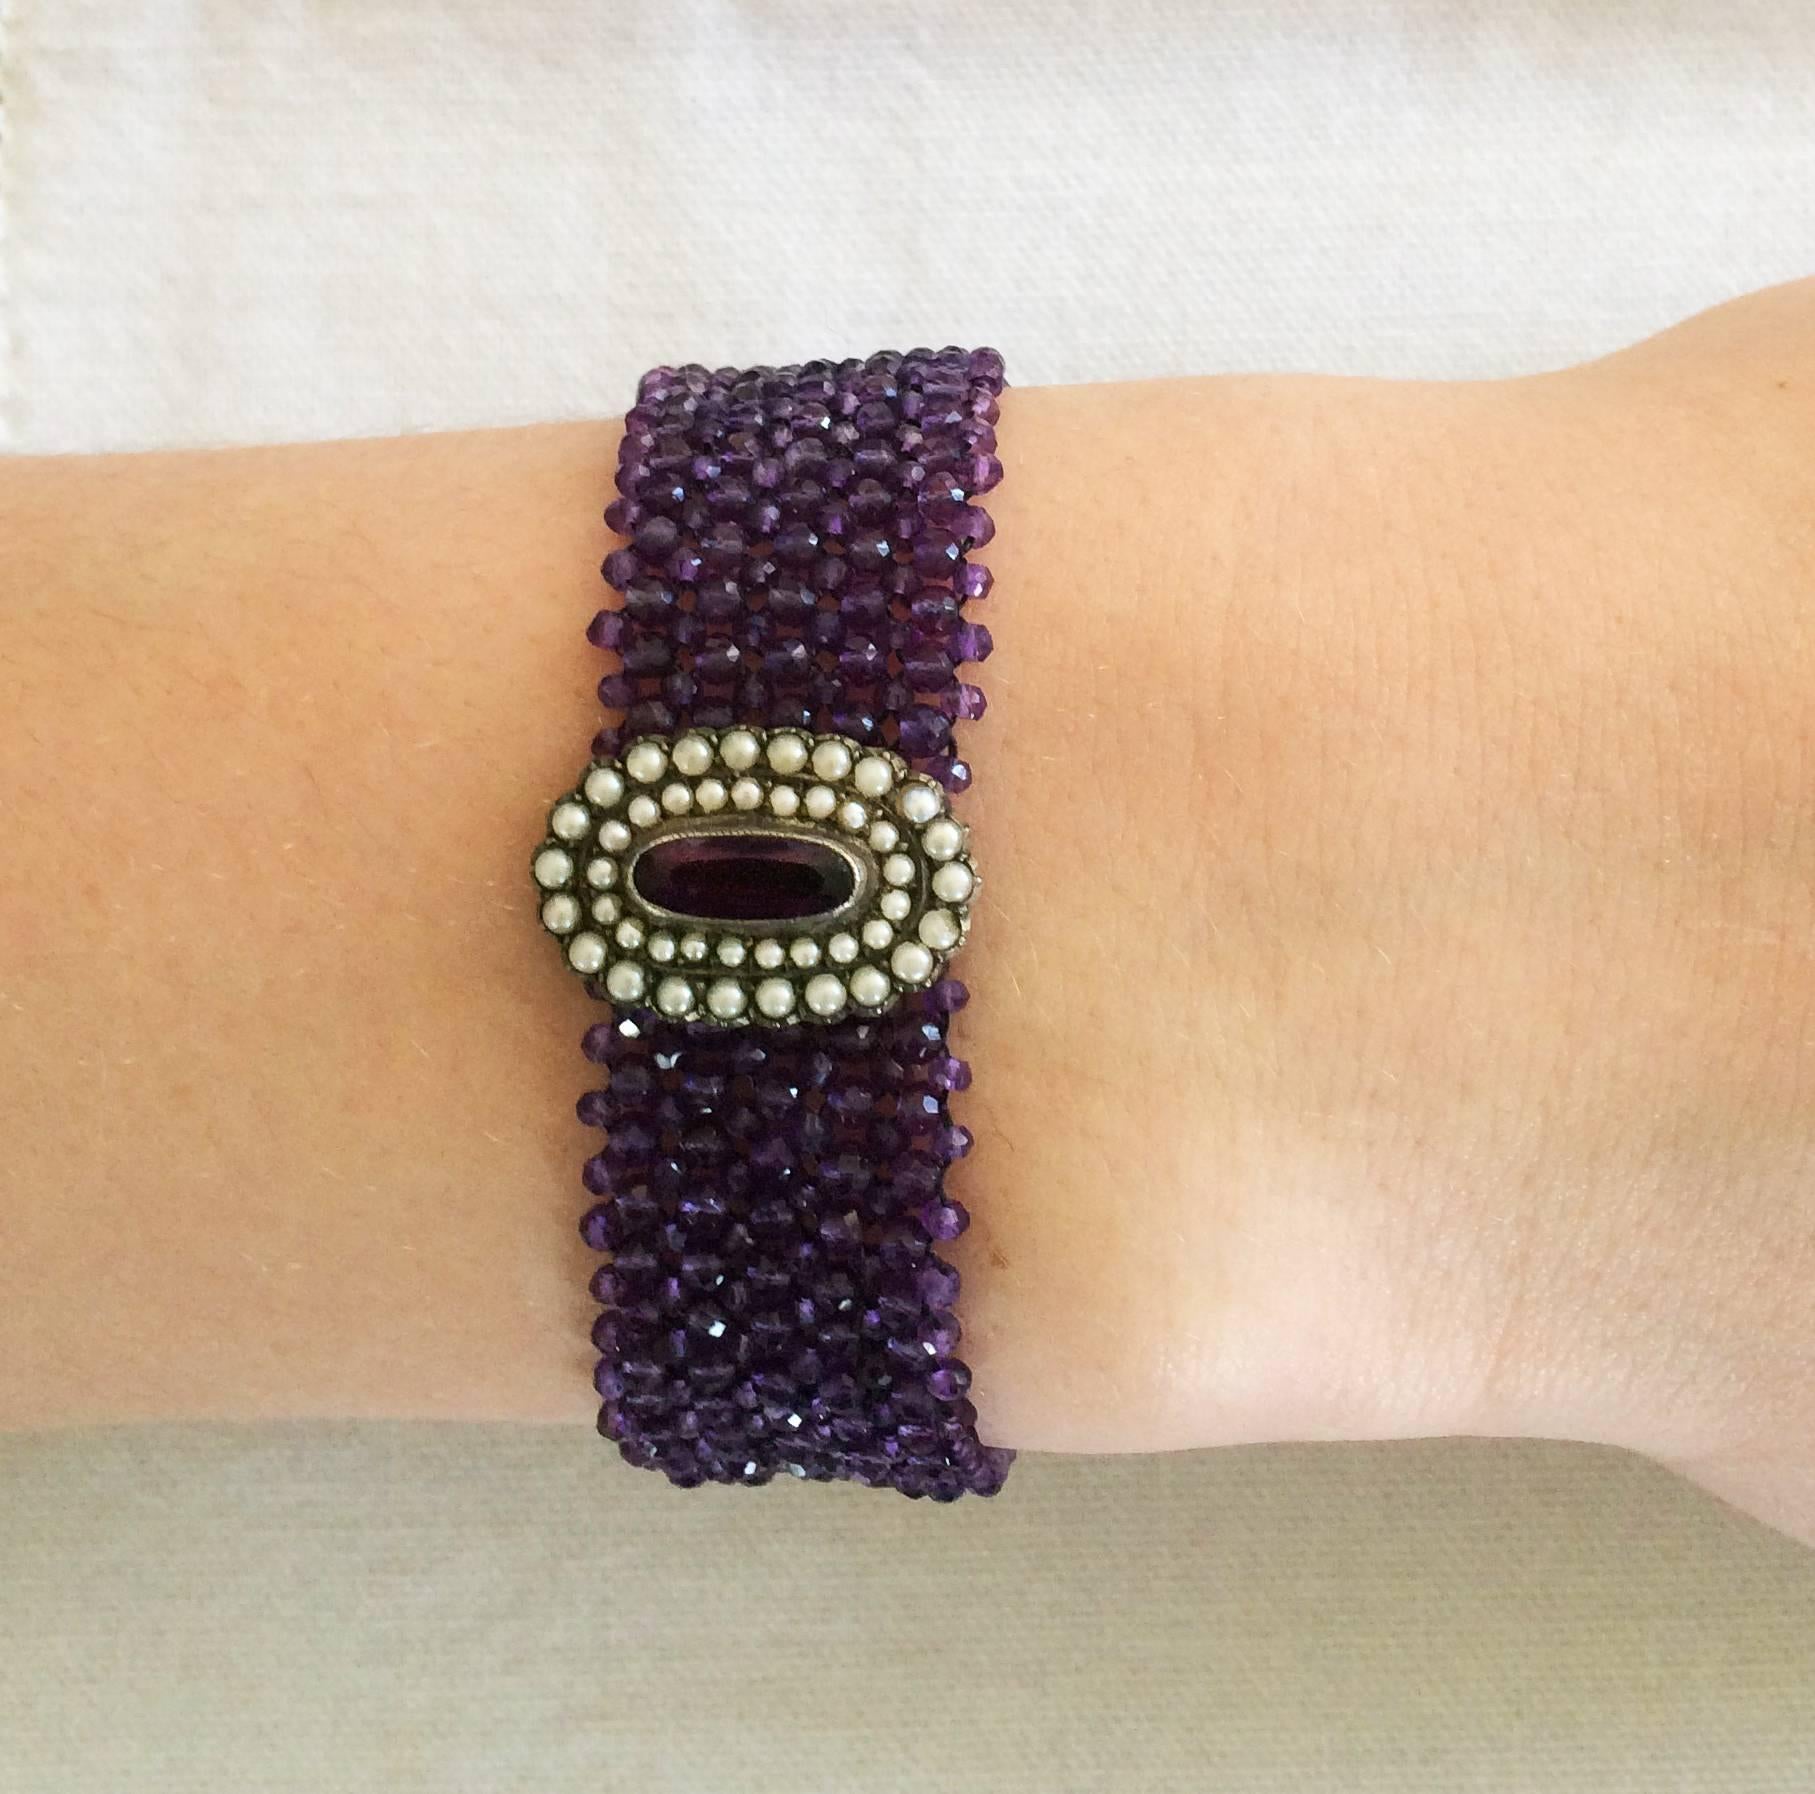 A beautiful and delicate brooch is redesigned as the centerpiece of this bracelet. Tiny 1-1.5 mm faceted light purple amethyst beads are delicately hand-woven together creating a design reminiscent shimmering fabric.  The secure sliding clasp is